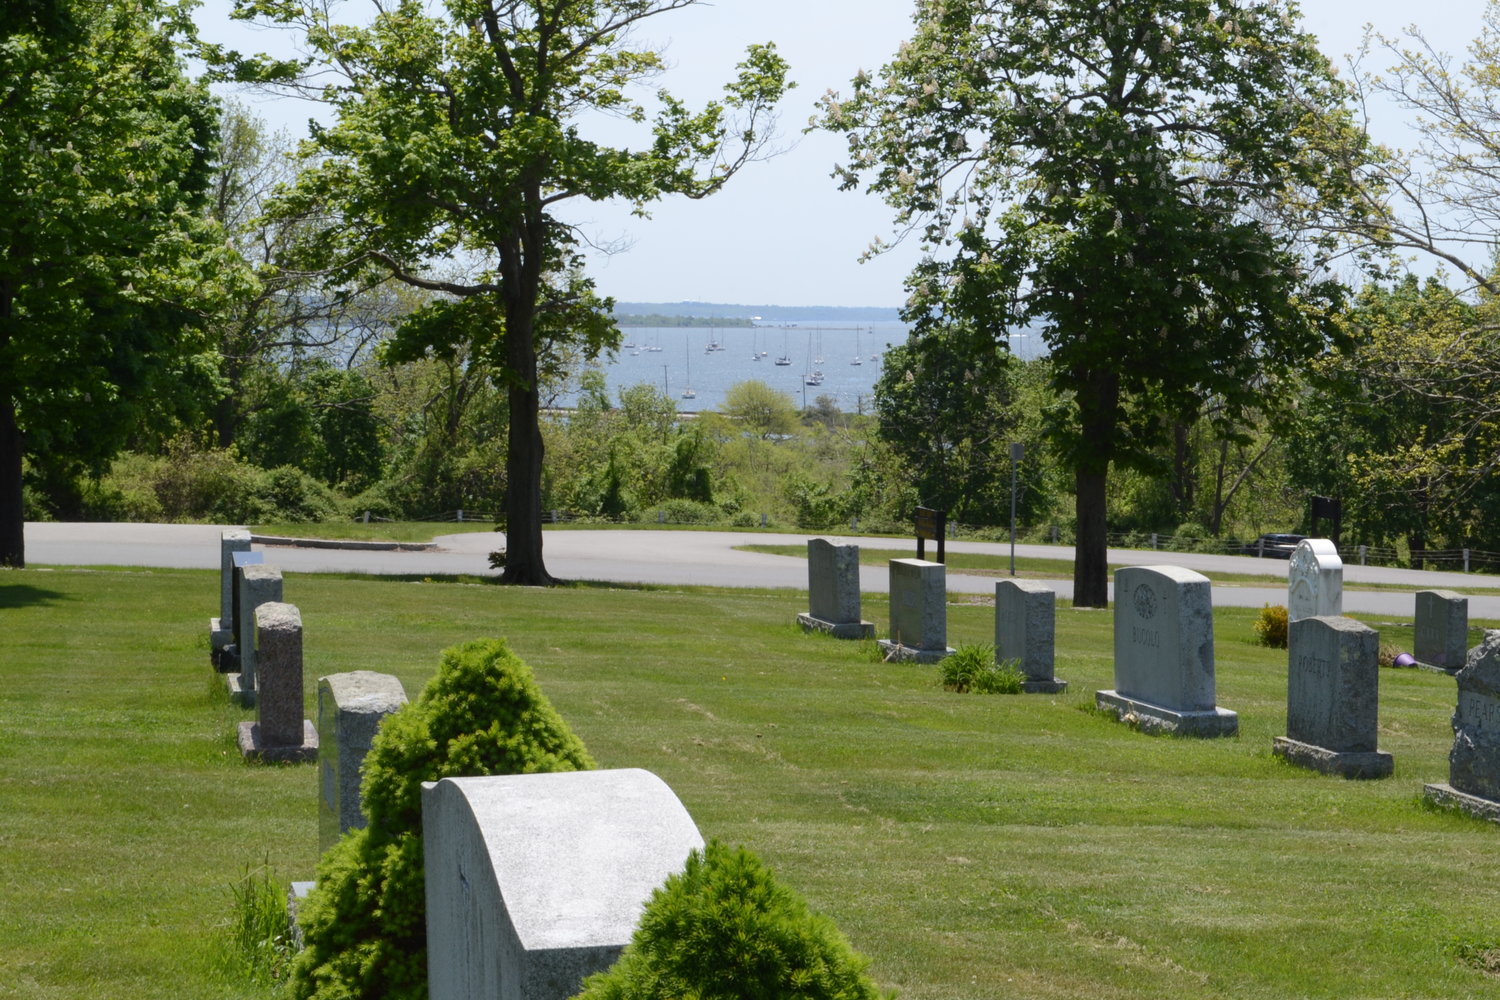 A pleasant view of the bay seen from the western end of the cemetery.